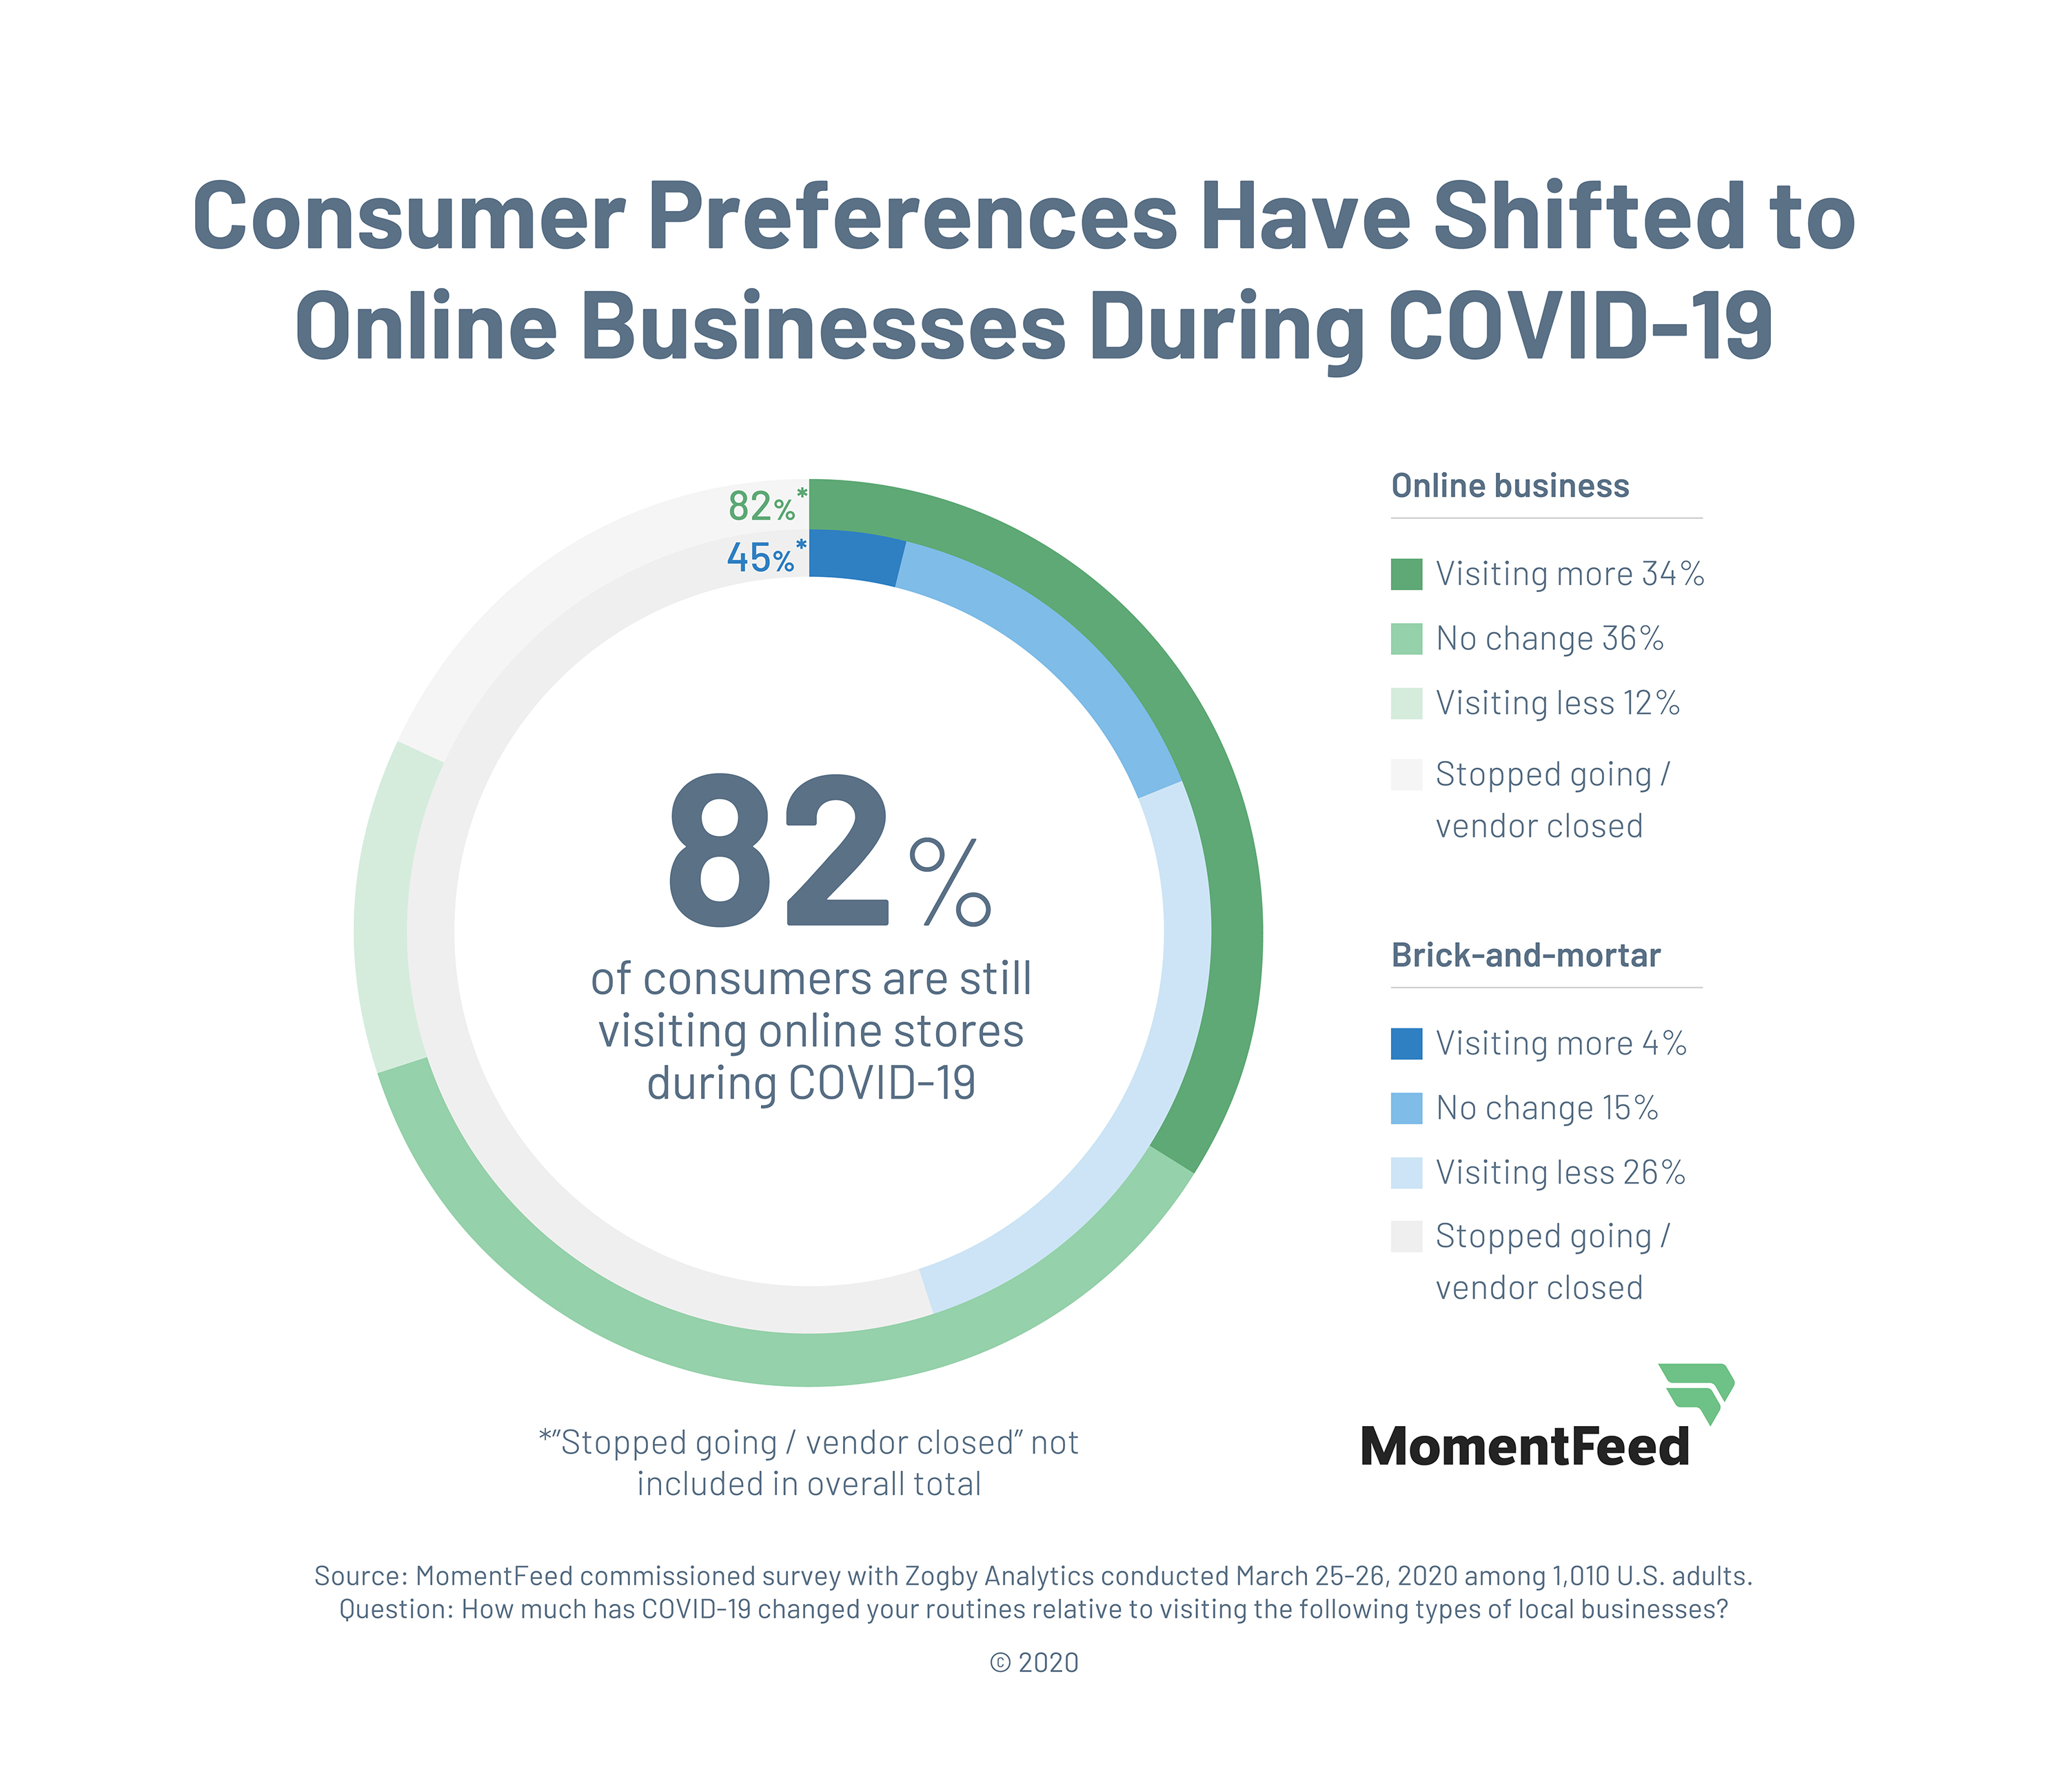 Consumer preferences are shifting online, with 82% of consumers visiting online businesses during COVID-19. In contrast, only 45% of consumers are visiting brick-and-mortar businesses.